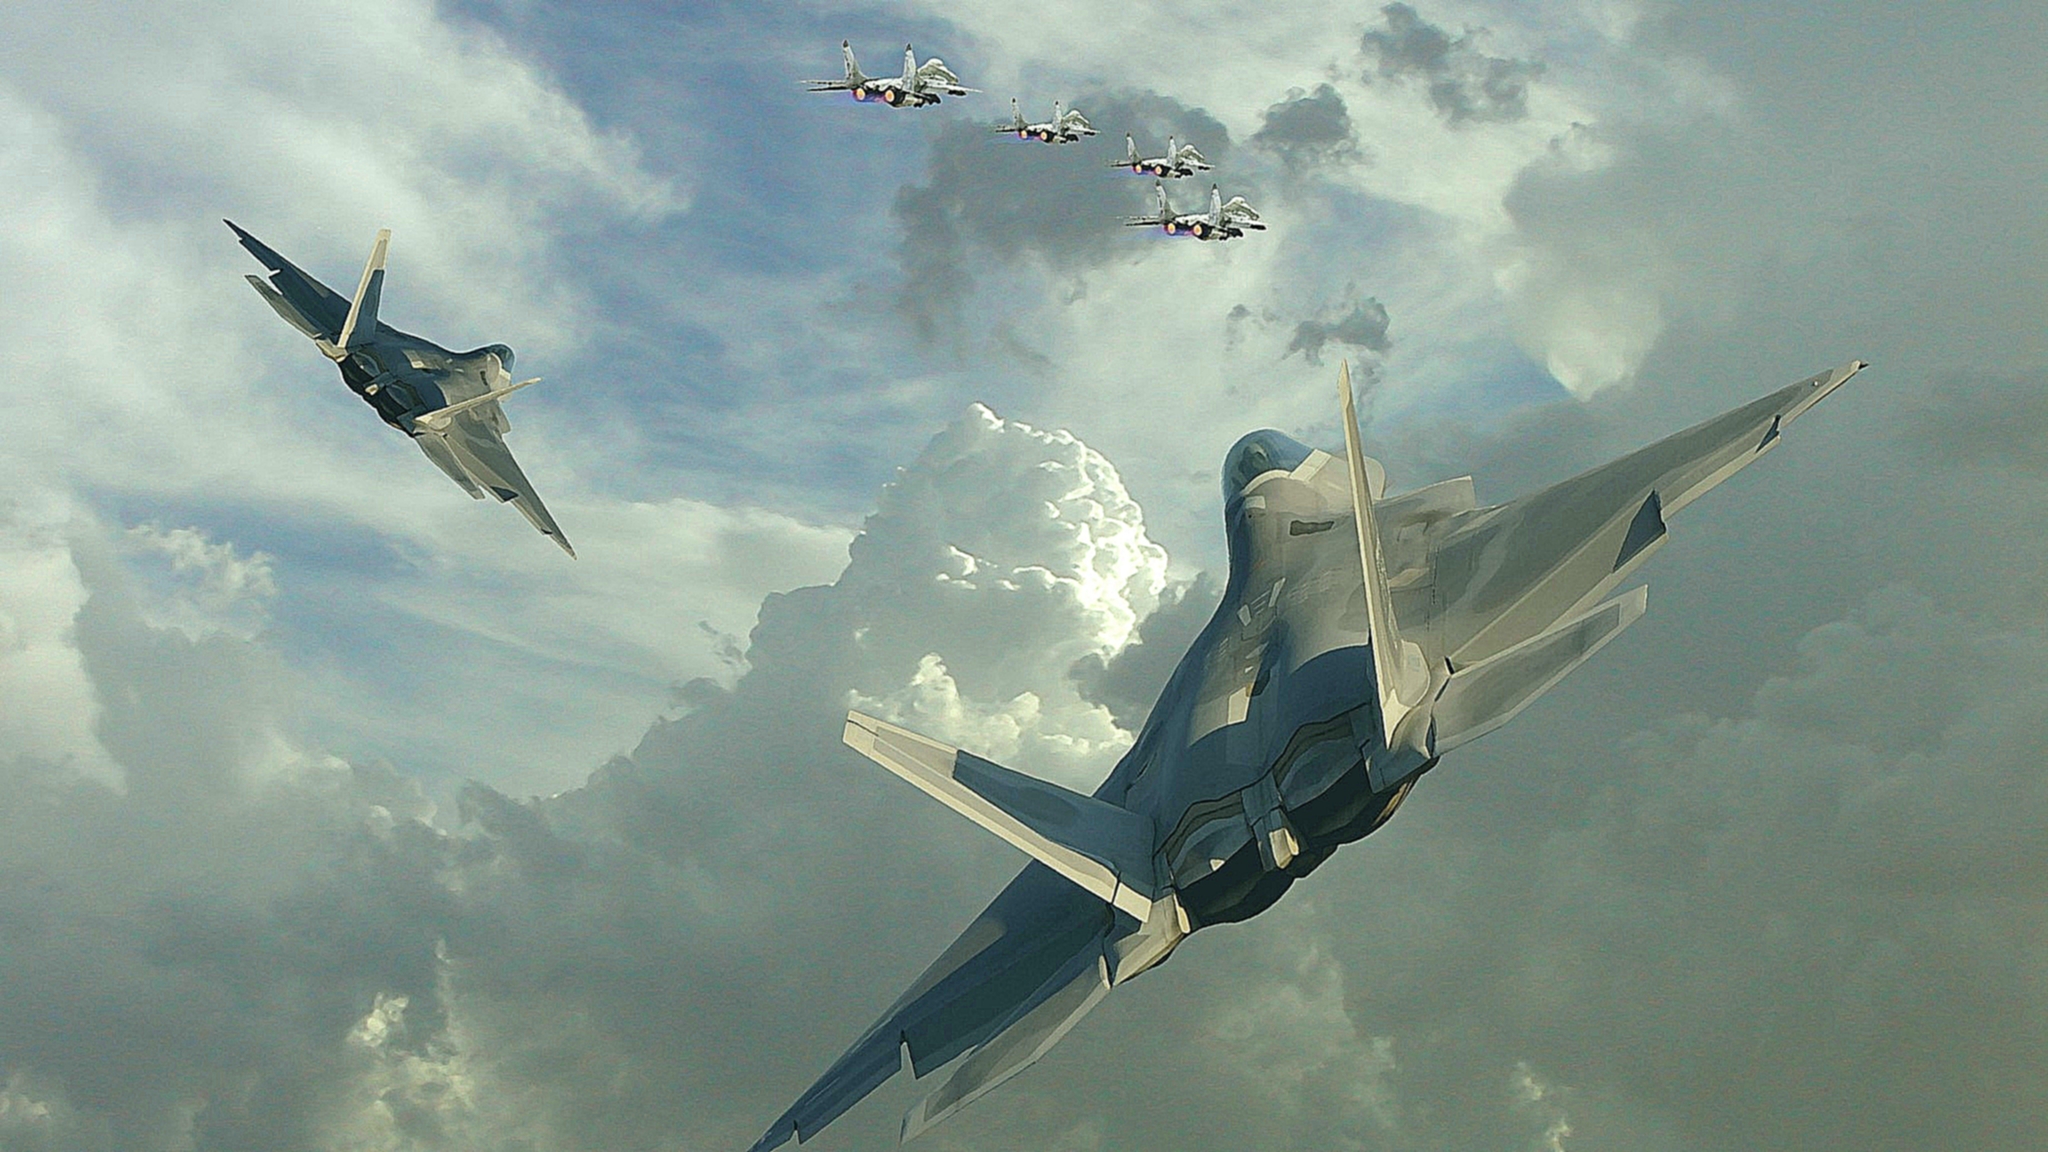 Fighter Aircraft In The Sky Wallpaper #89746 - Resolution 1920x1080 px.